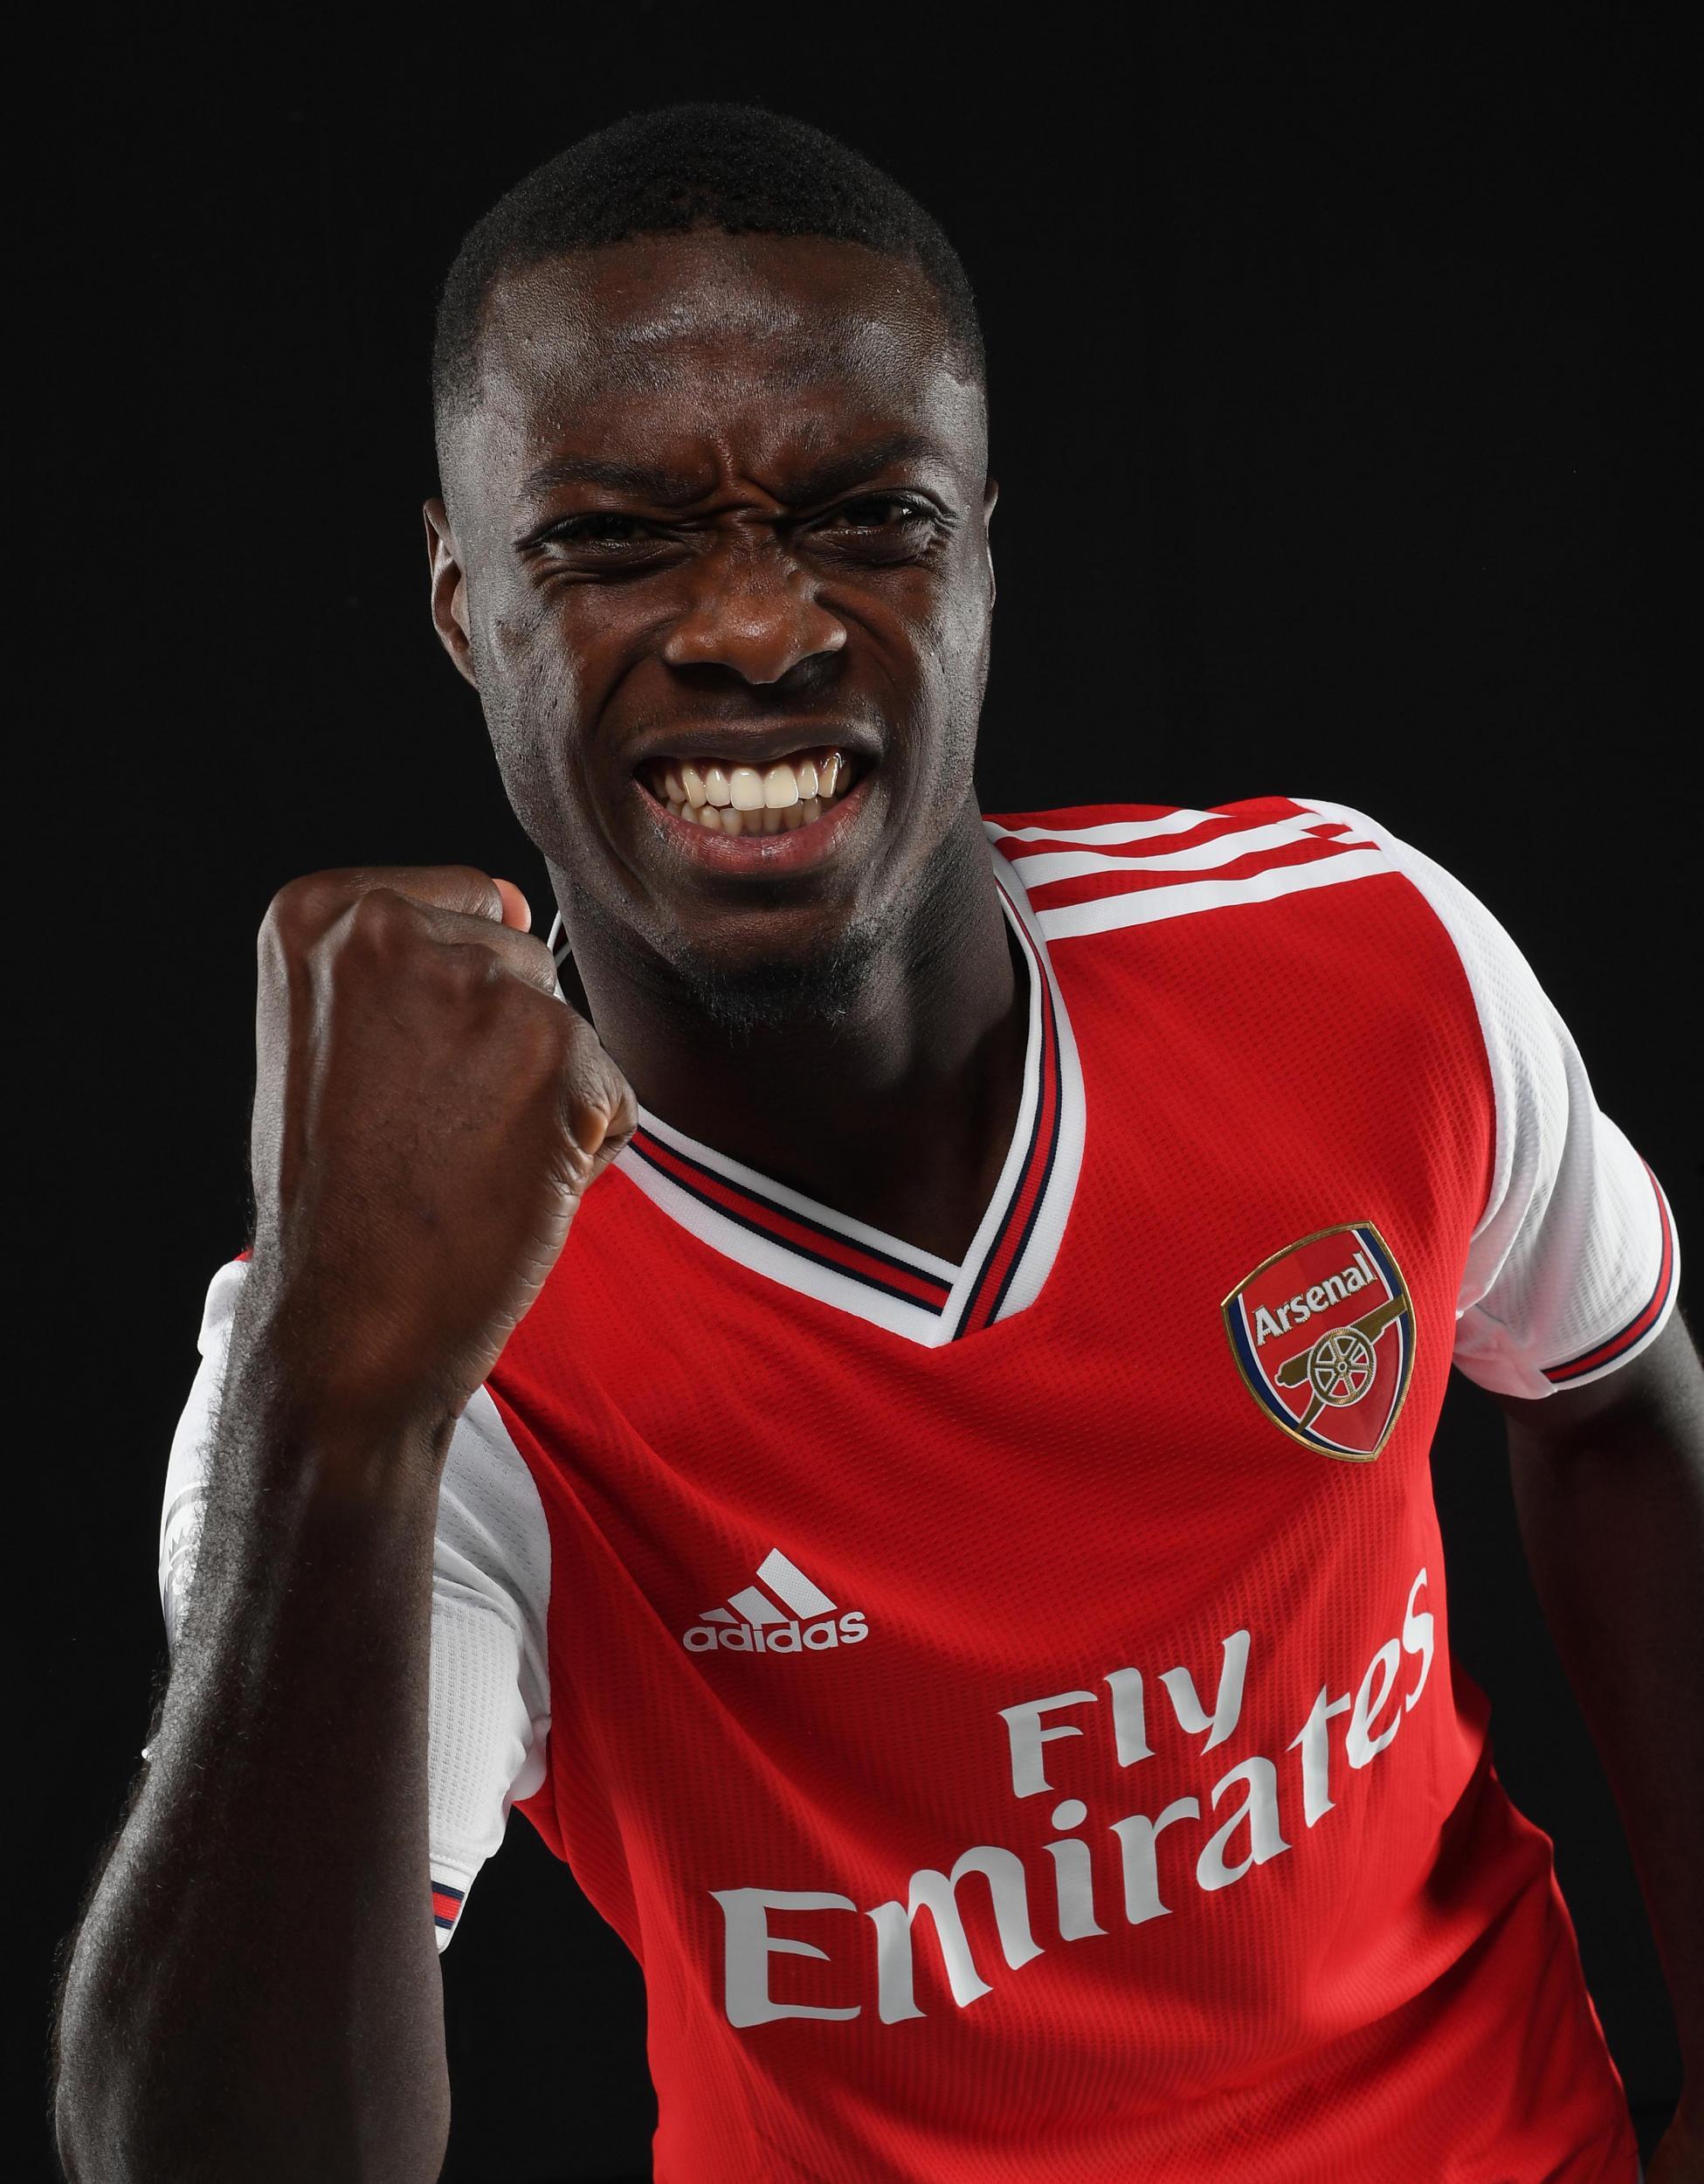 Nicolas Pepe In Picture: Arsenal Club Record Signing Poses